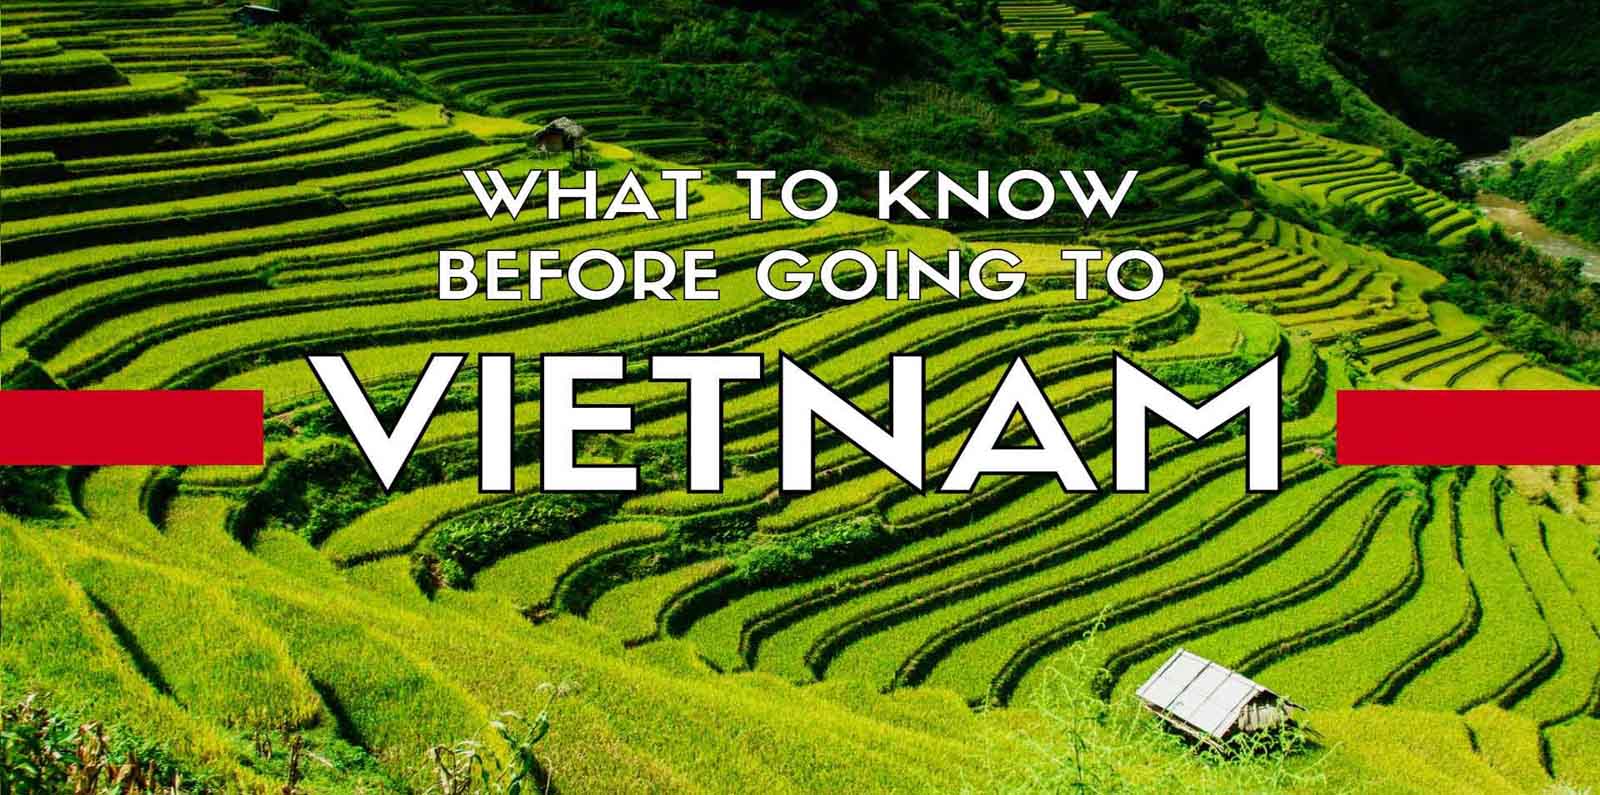 These are the most beautiful places in Vietnam